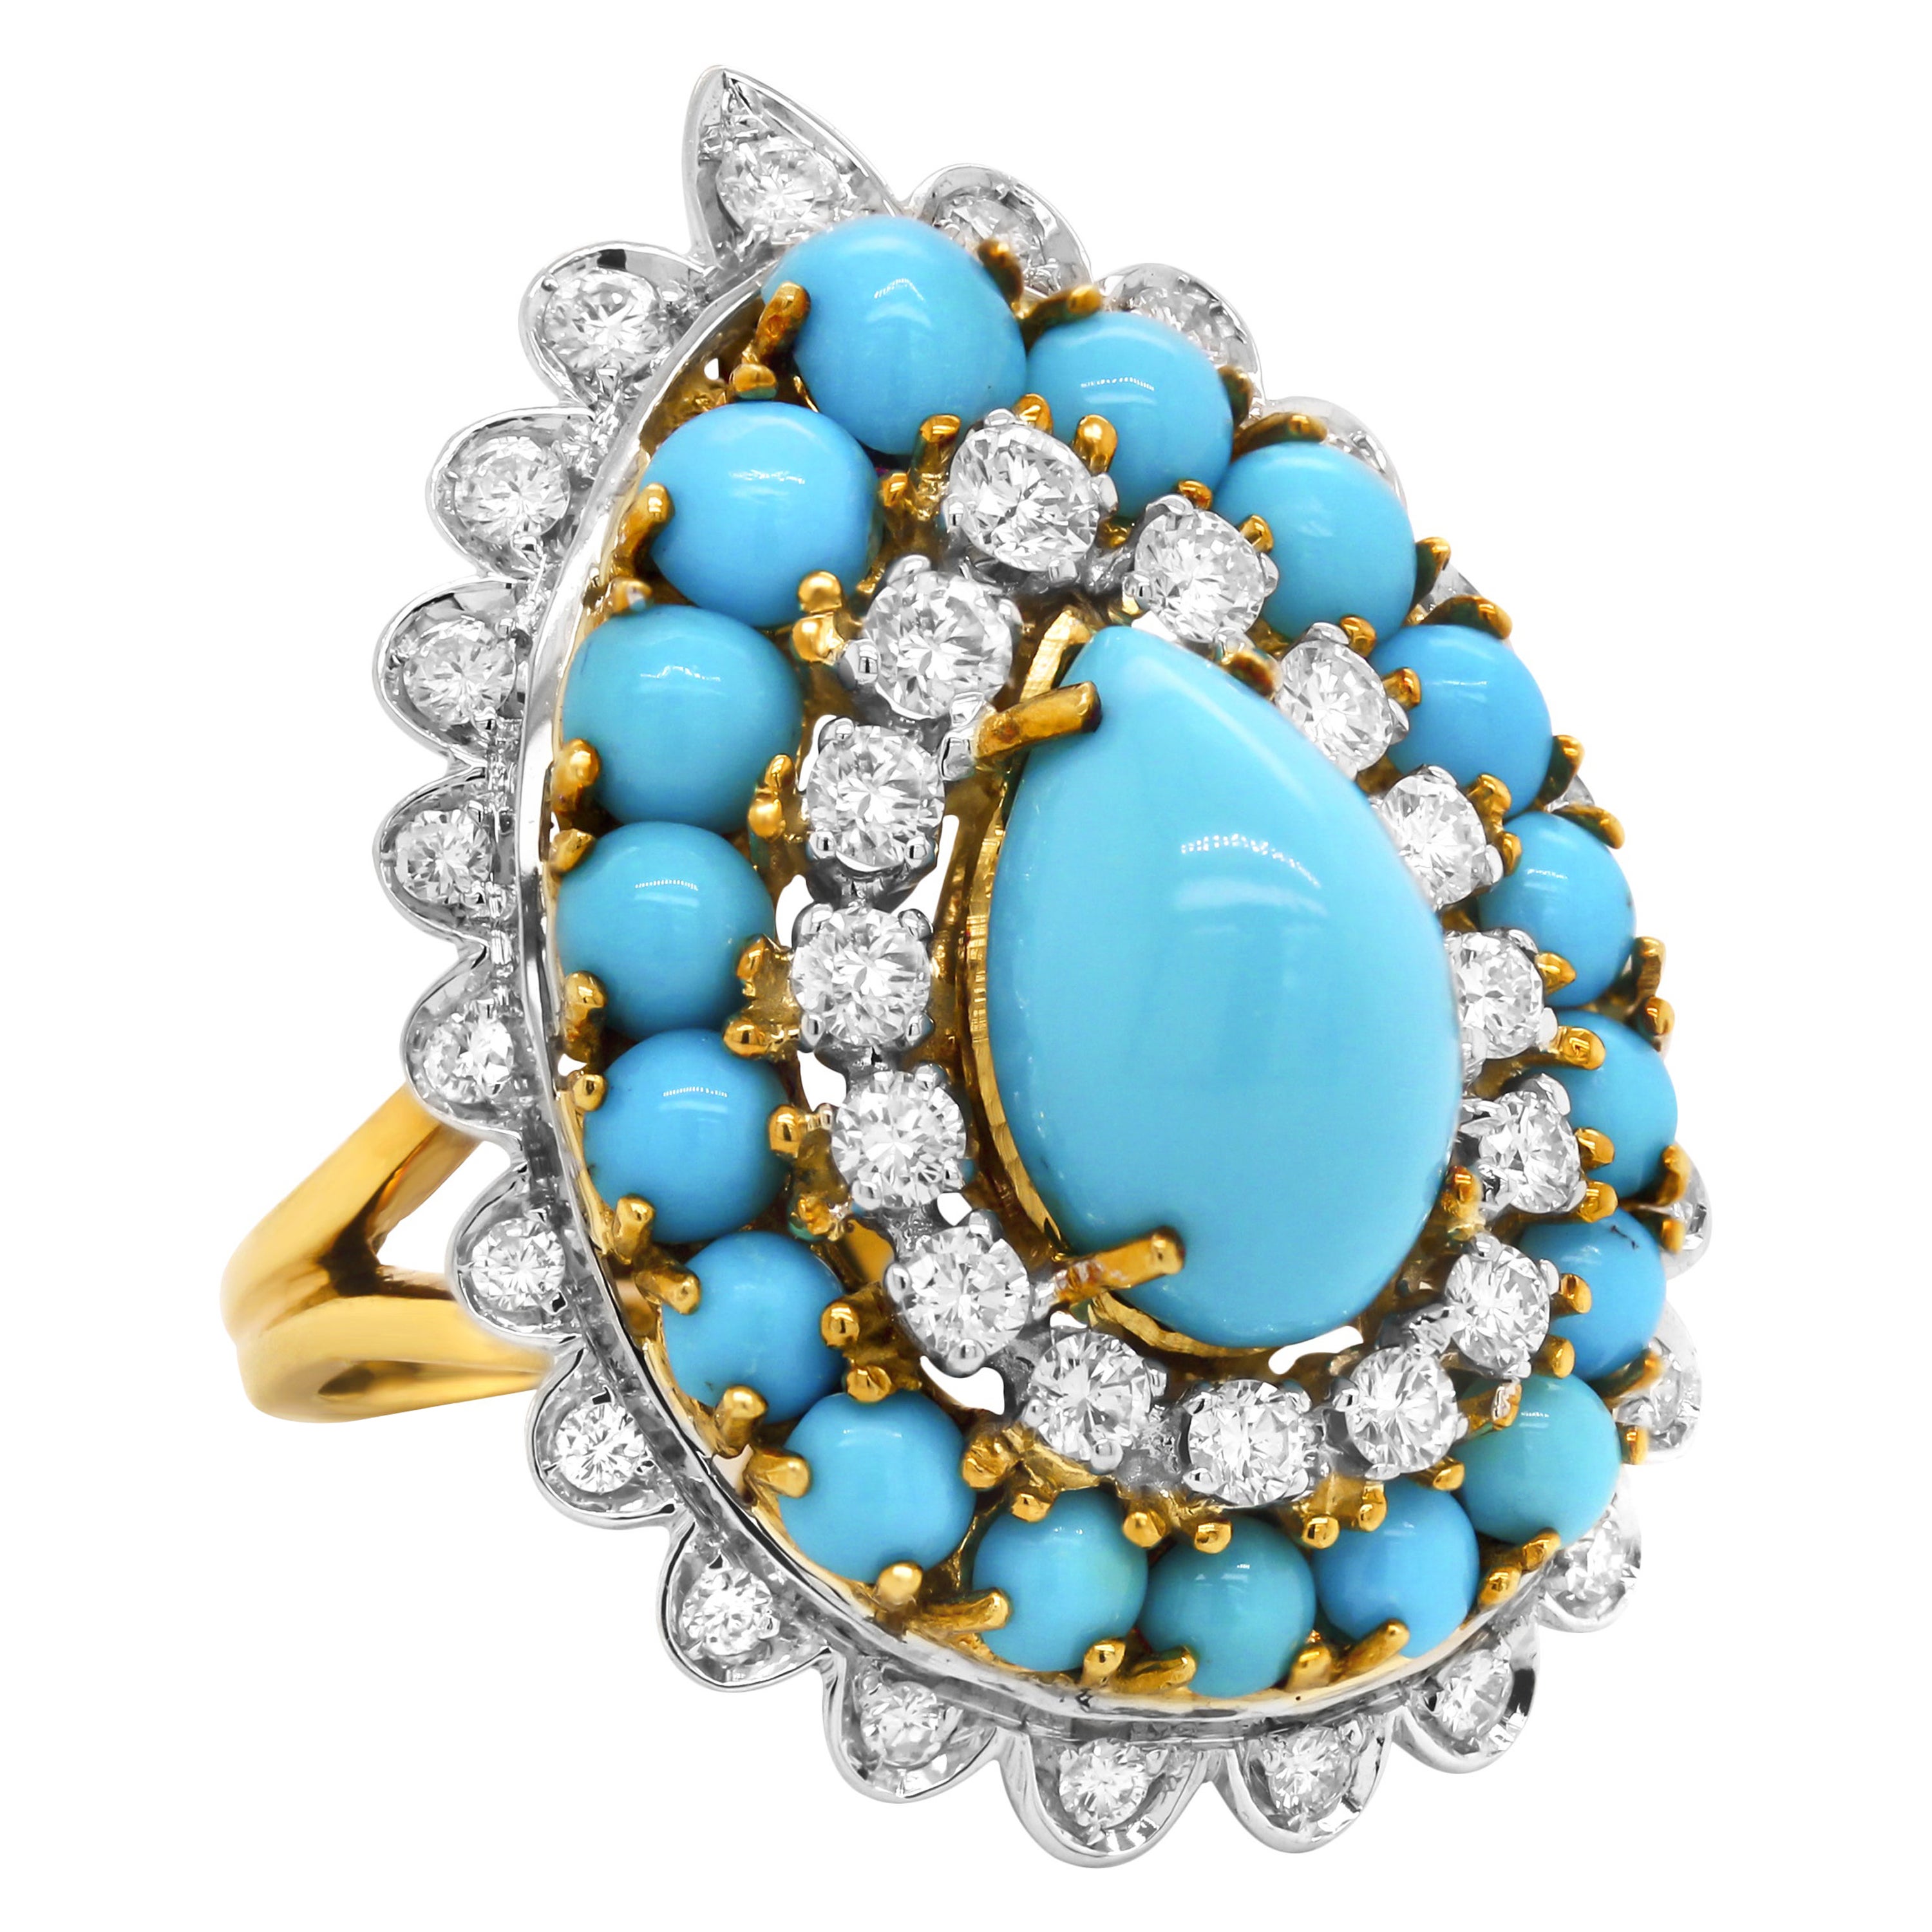 18K Yellow White Two Tone Gold Pear Shape Sleeping Beauty Turquoise Ring